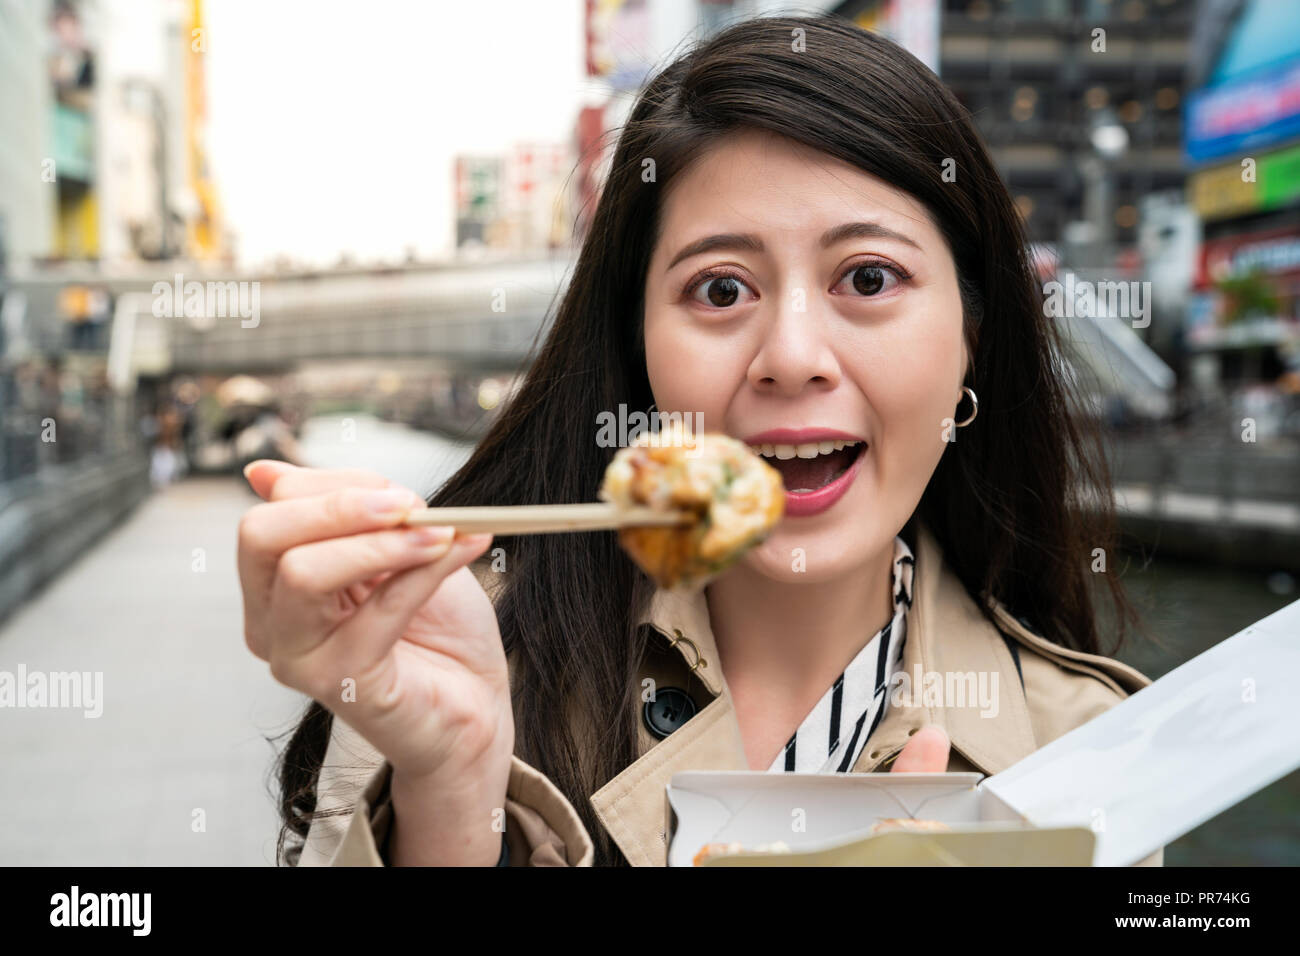 female tourist cheerfully standing next to the river and using chopsticks to eat takoyaki, she is giving a big attractive smile to the camera Stock Photo